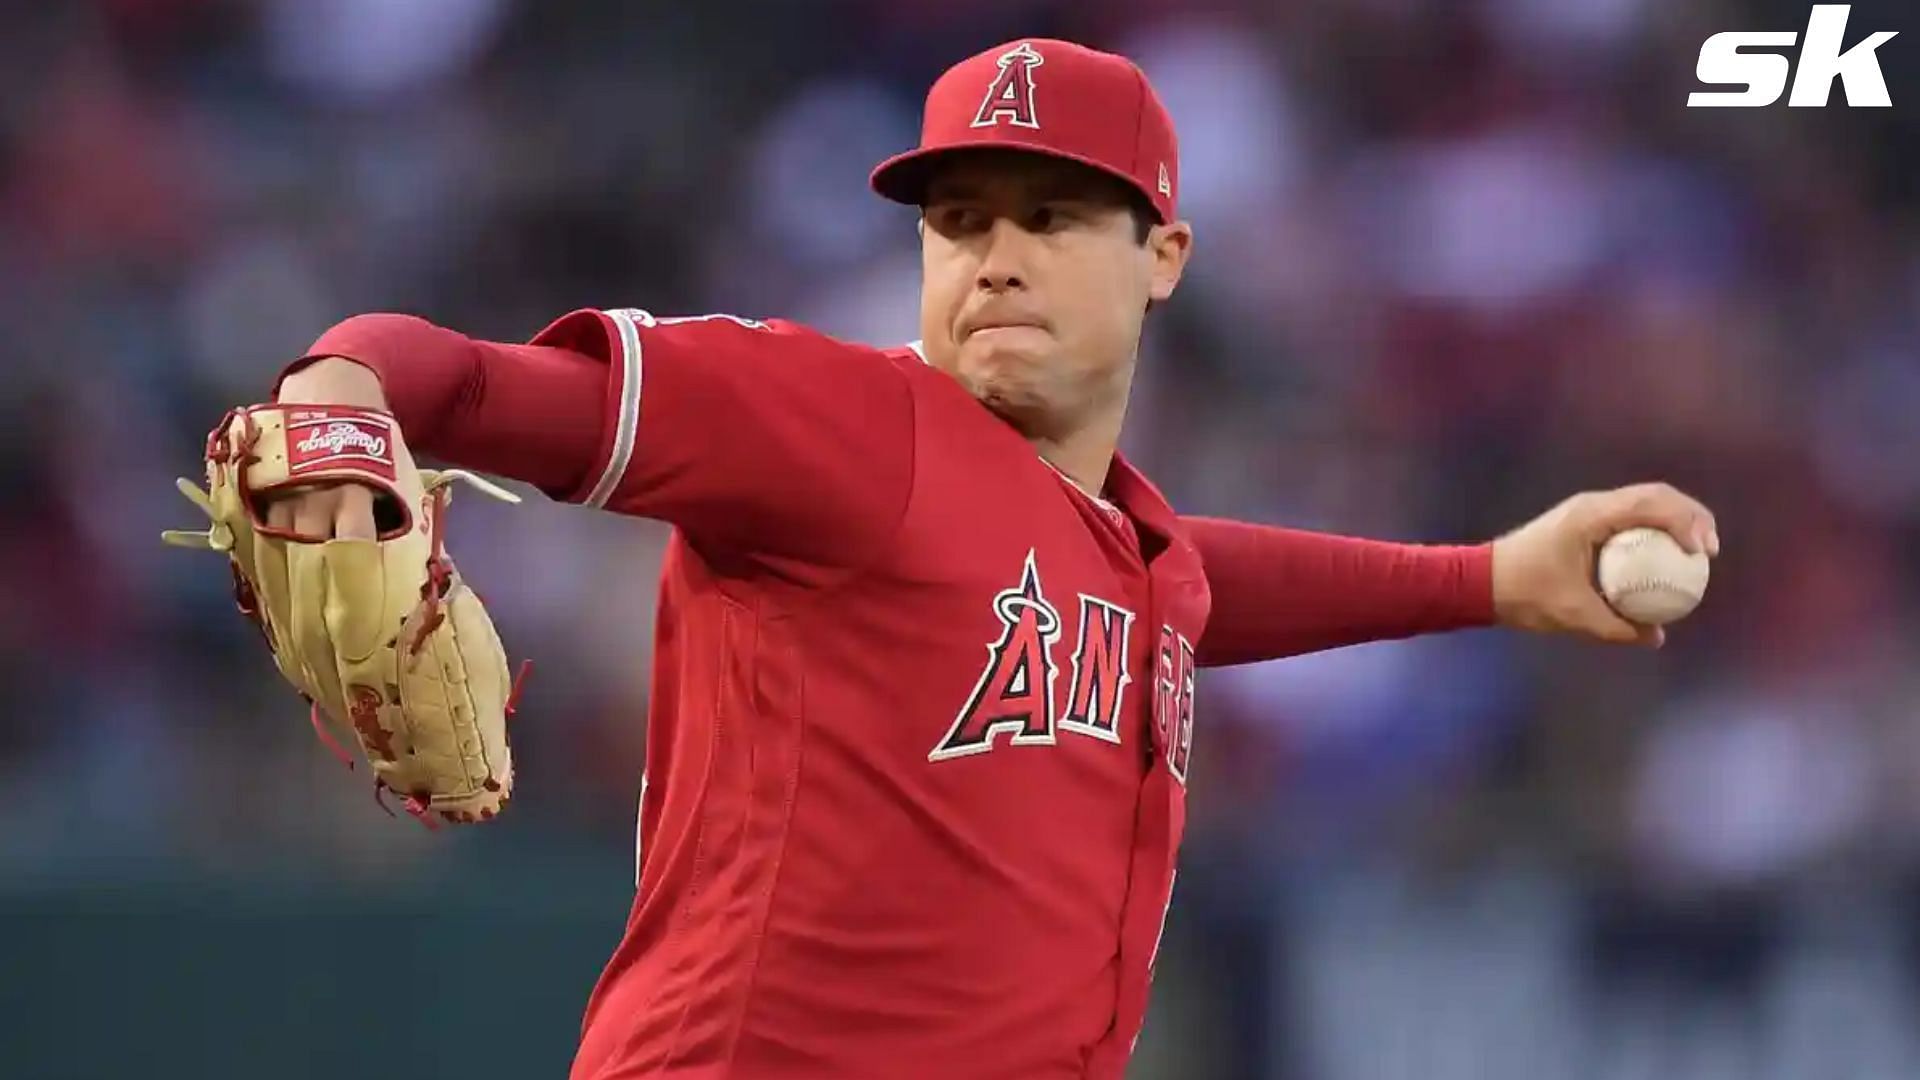 Tyler Skaggs for 27 at the time of his death.